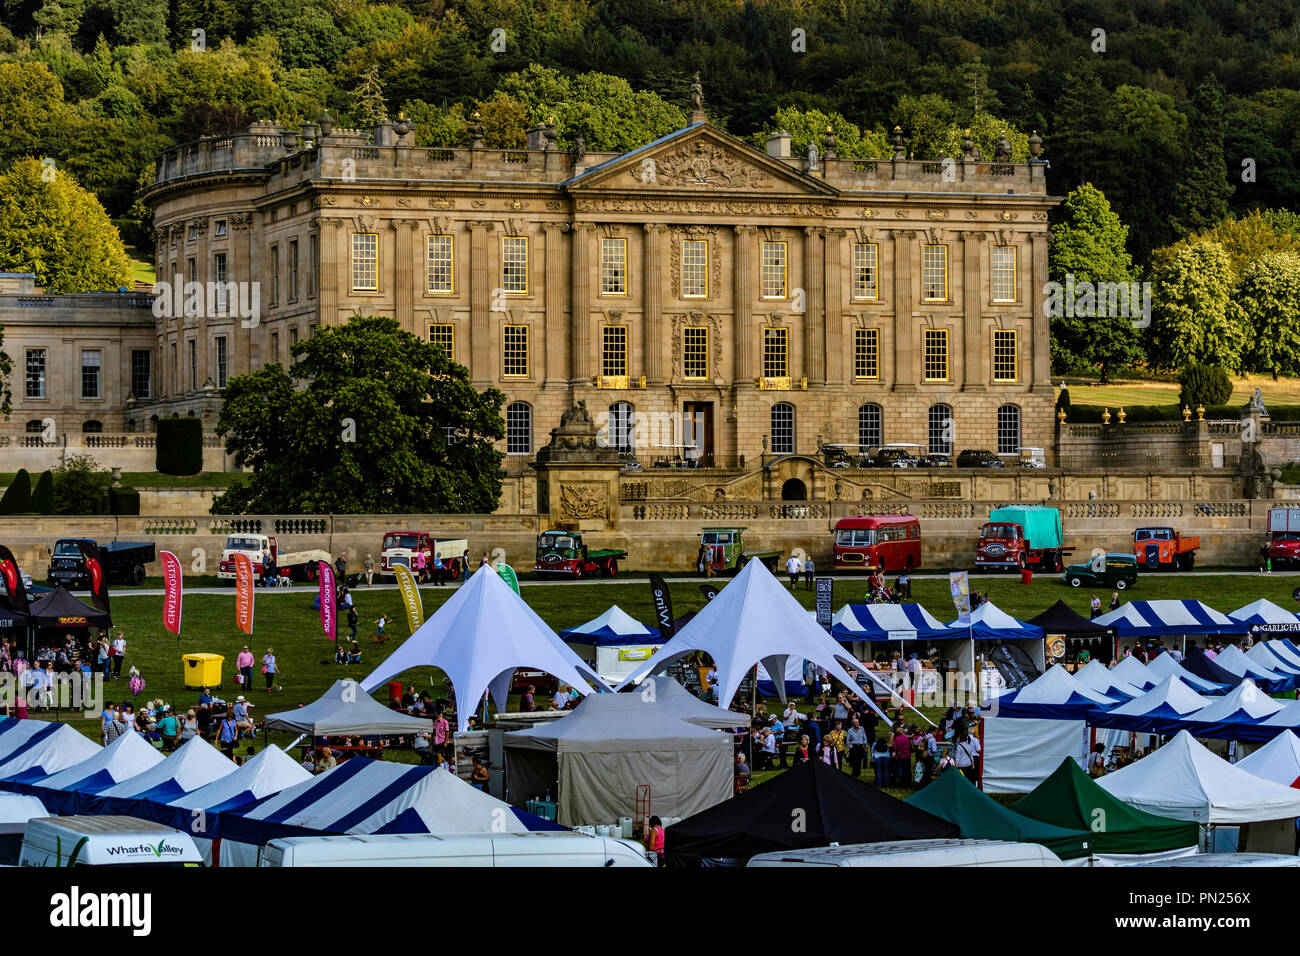 Chatsworth House activities including working gundogs and country show events and displays Stock Photo